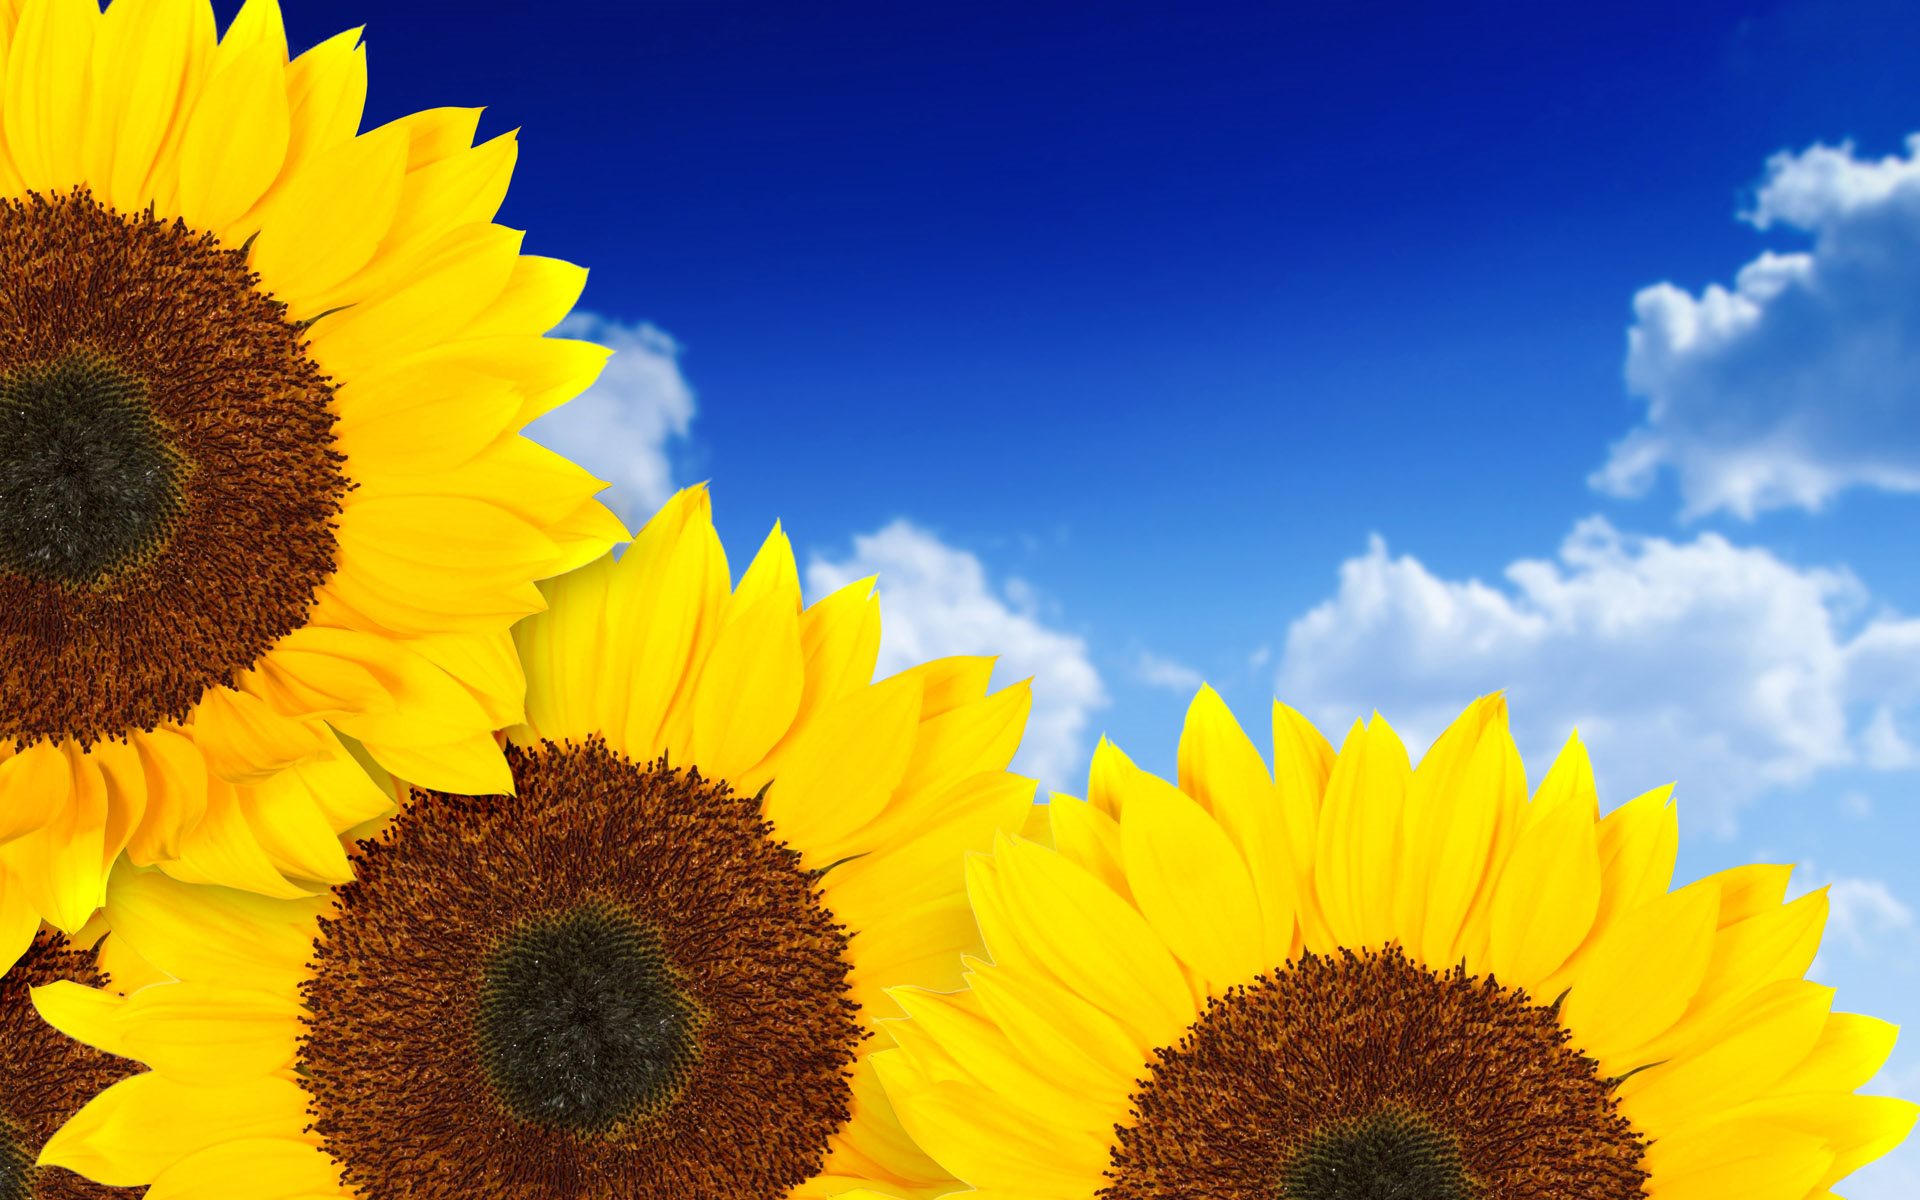 pure hd wallpapers,flower,sunflower,flowering plant,sky,yellow